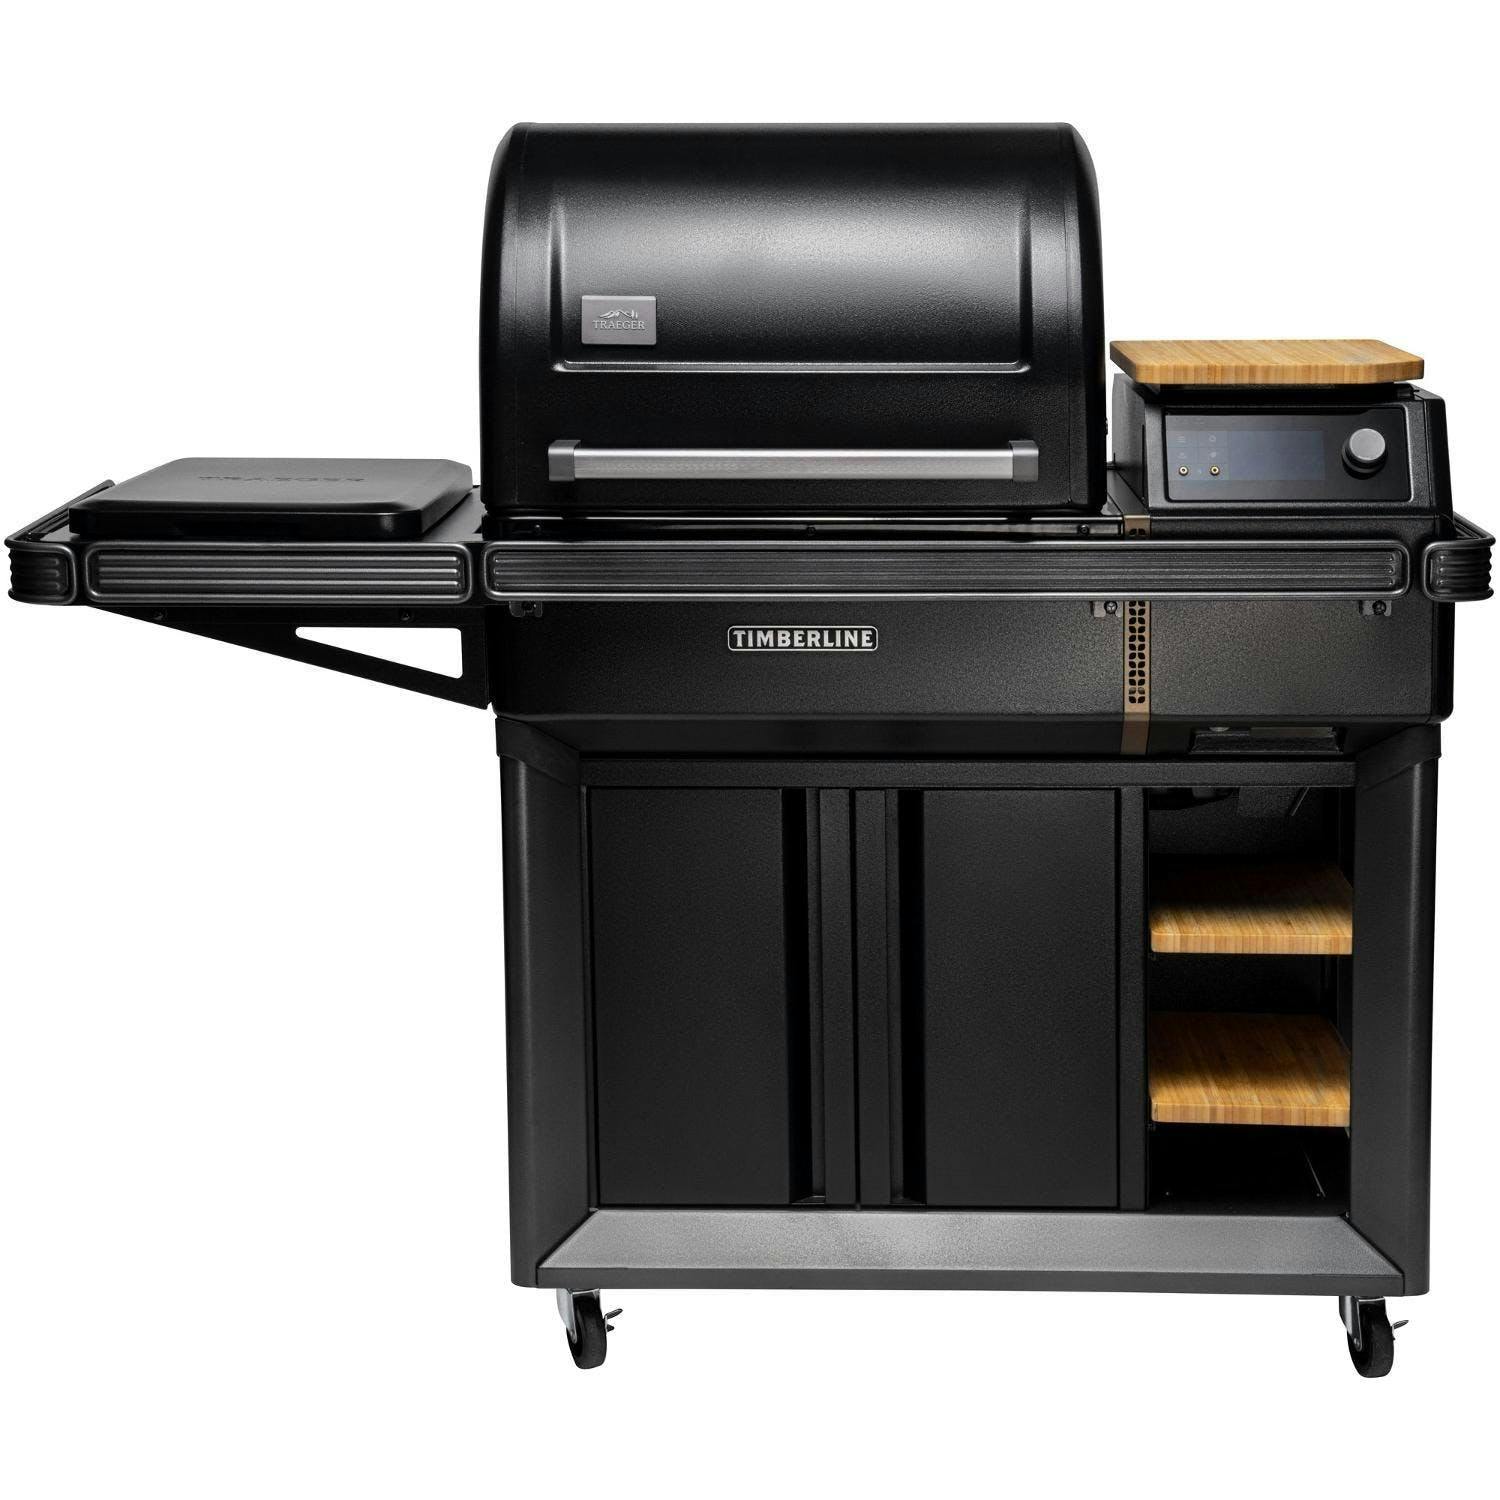 Traeger All-New Timberline Wi-Fi Controlled Wood Pellet Grill